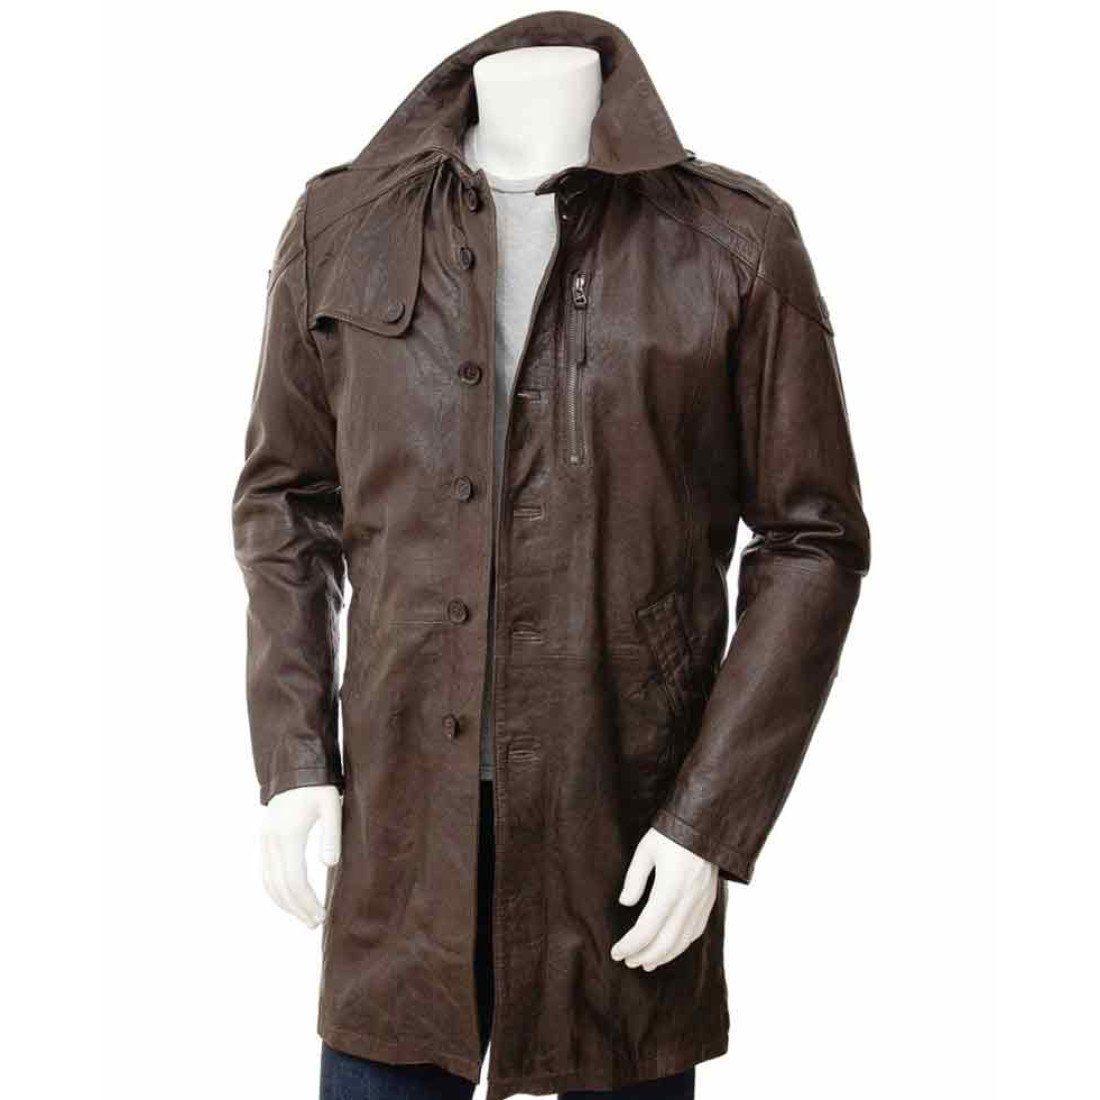 Men's Single Breasted Waxed Brown Leather Coat - Films Jackets